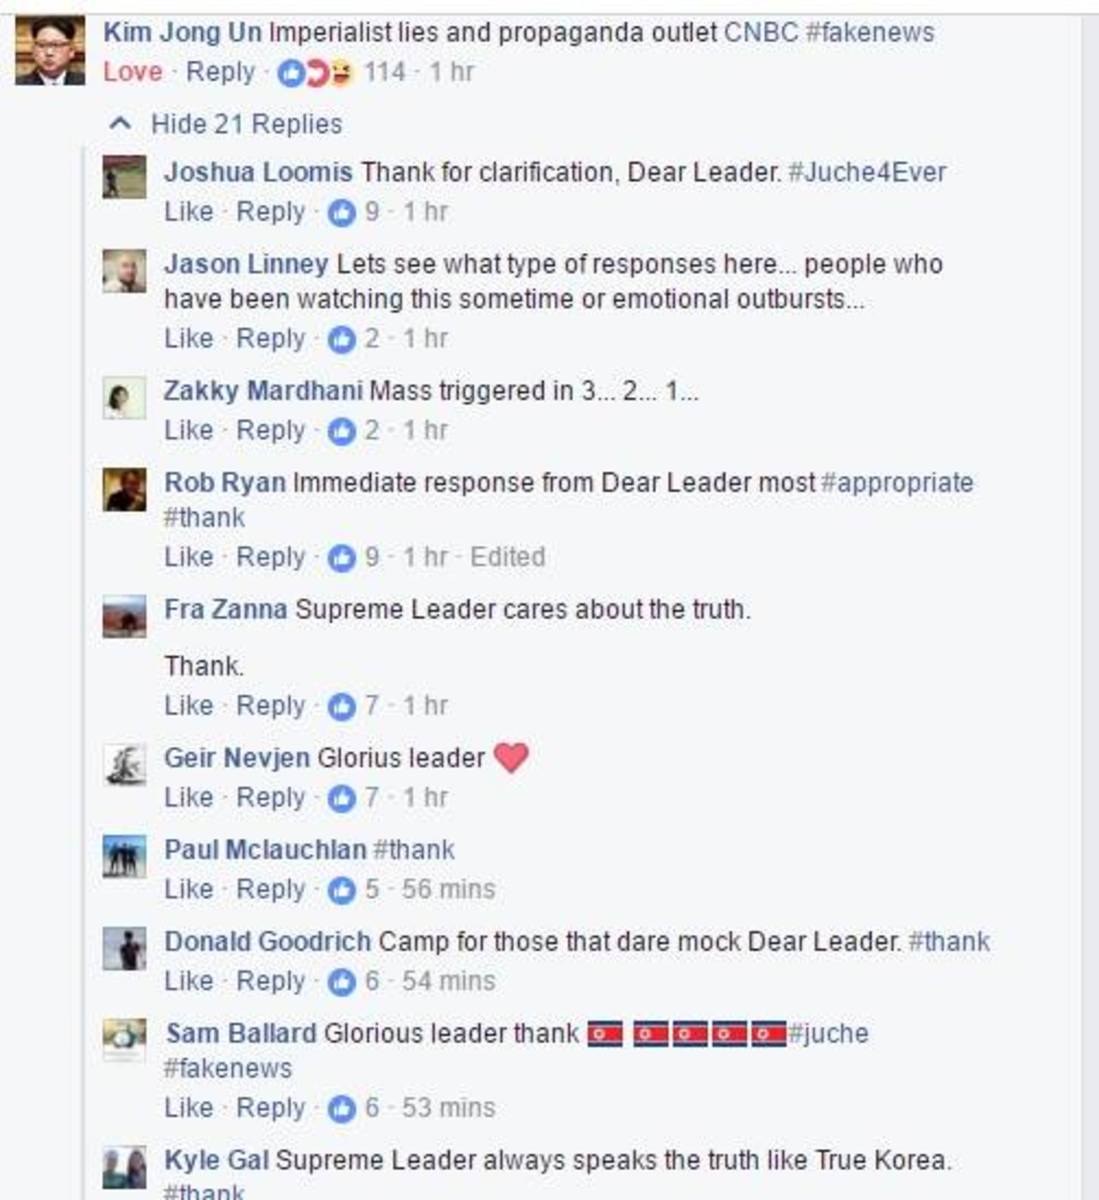 Comments made after the parody page made a statement on the article. 